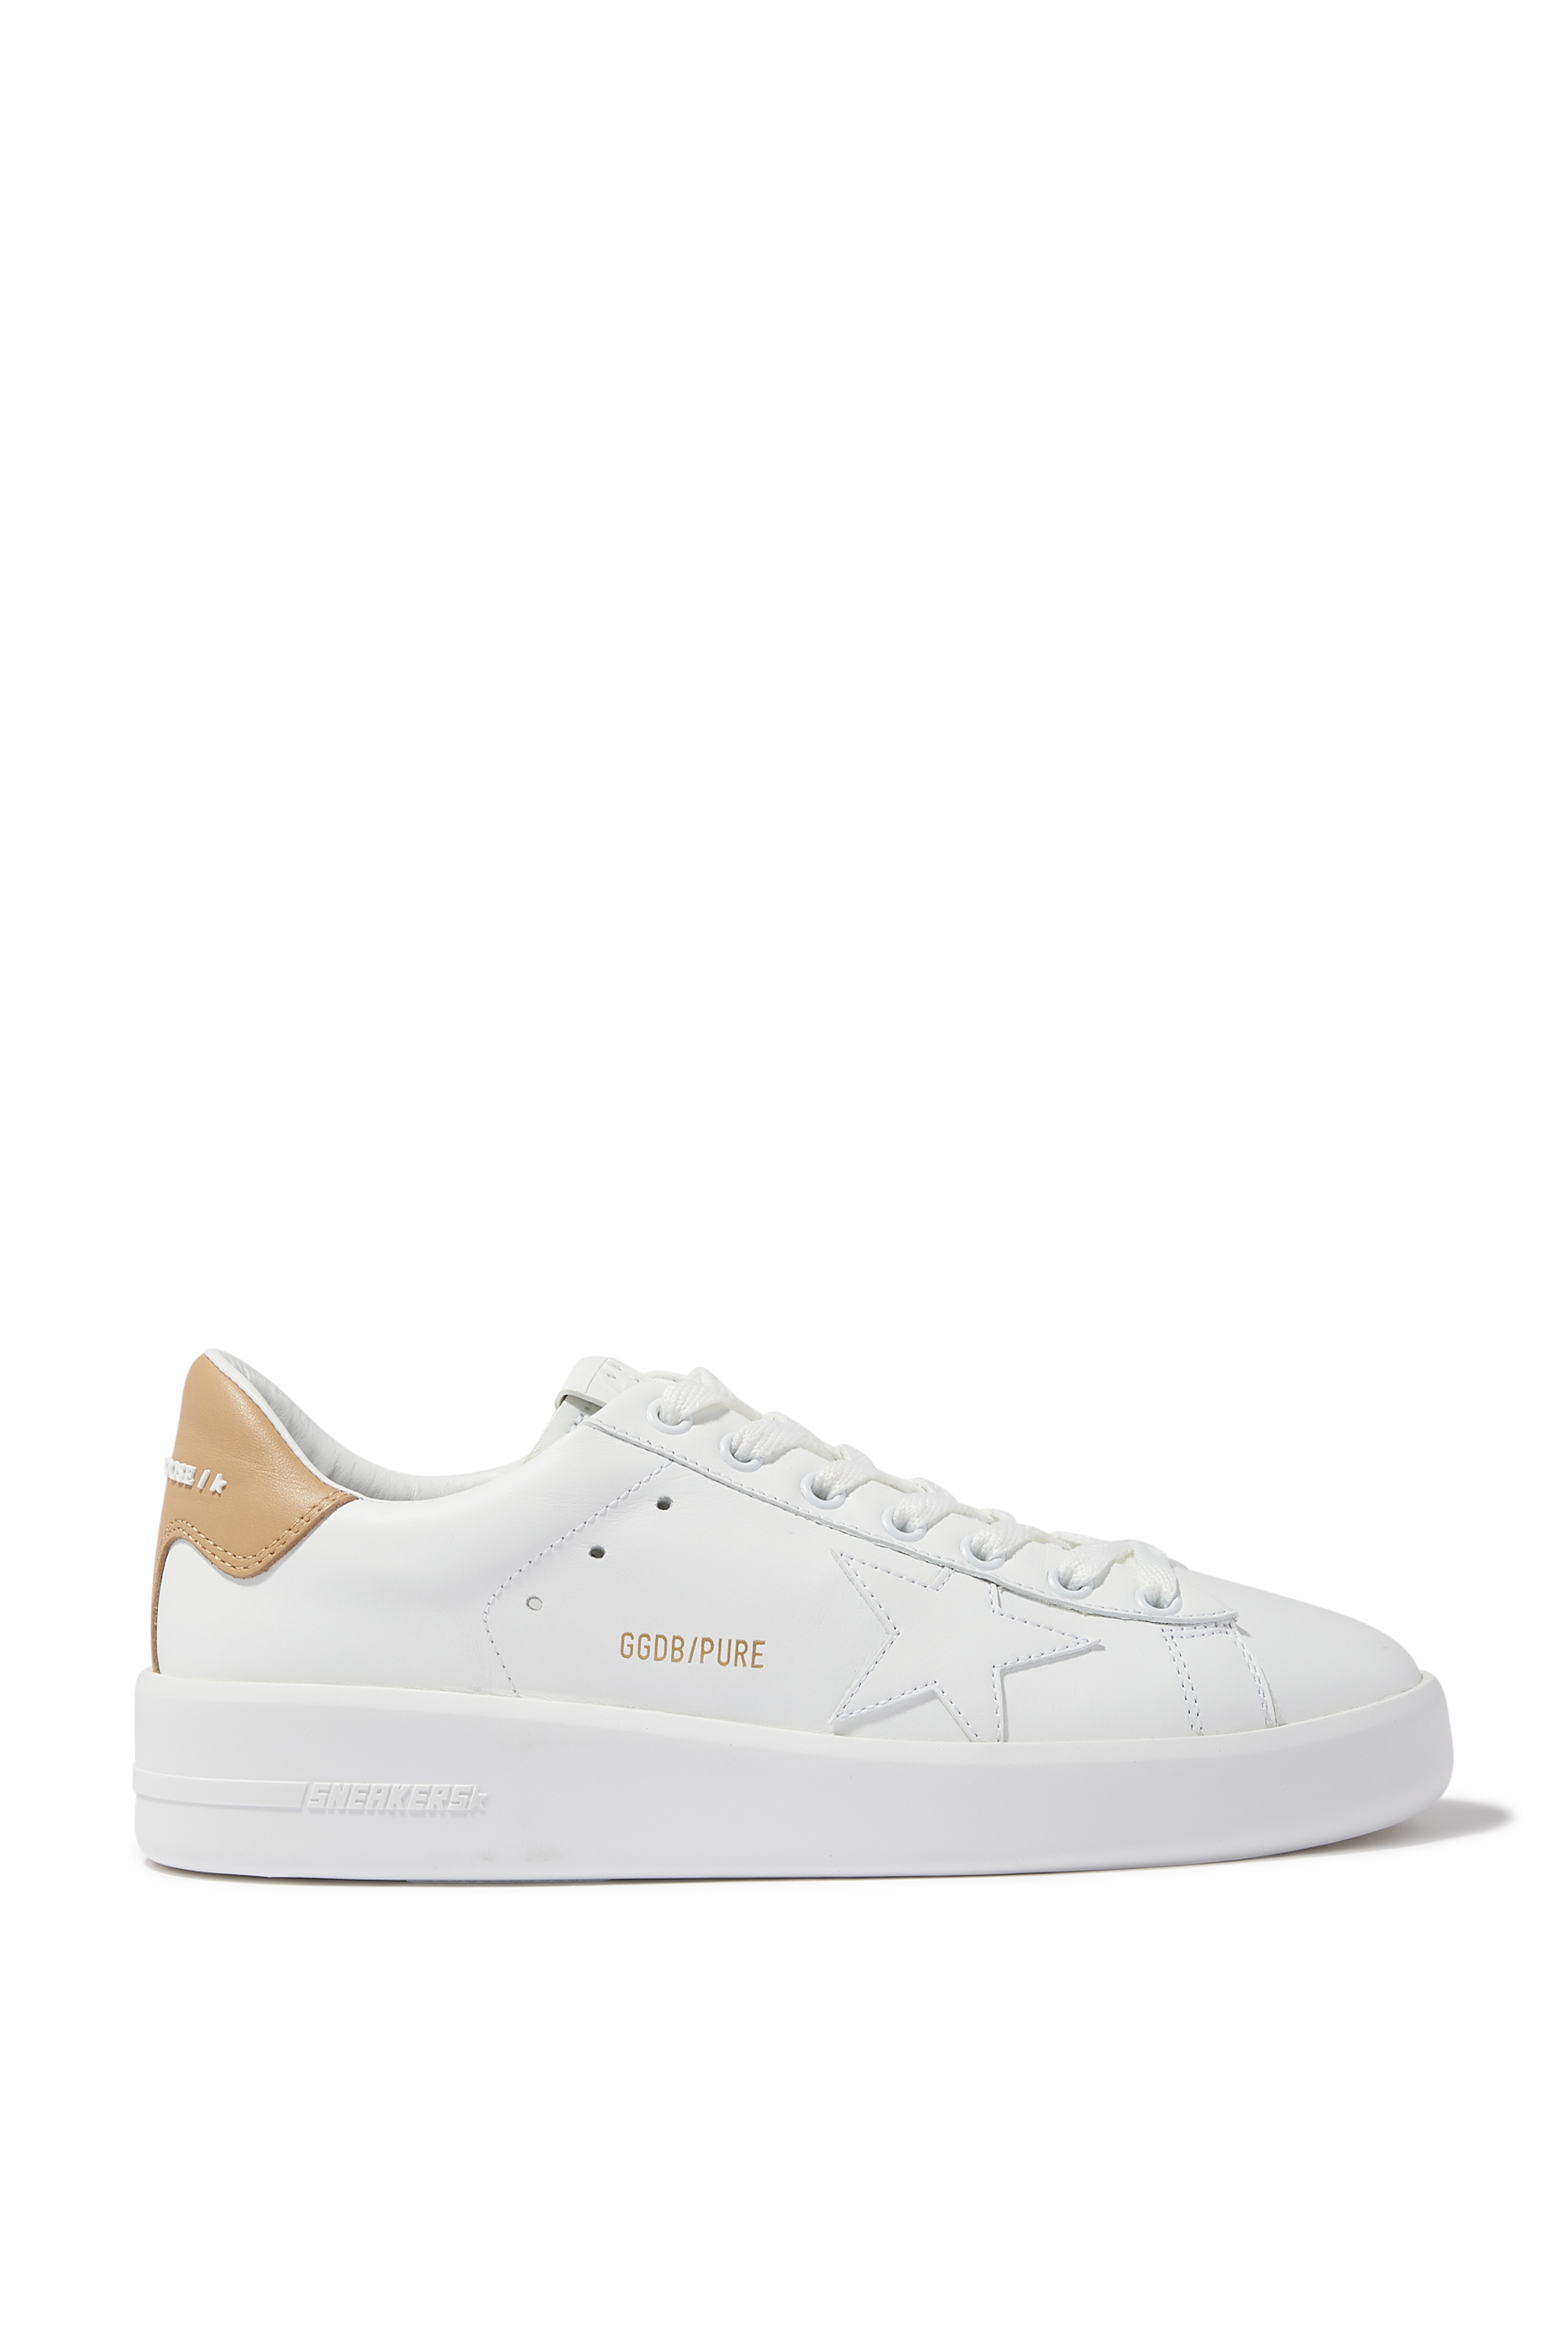 Buy Golden Goose Purestar Leather Sneakers for Womens | Bloomingdale's ...